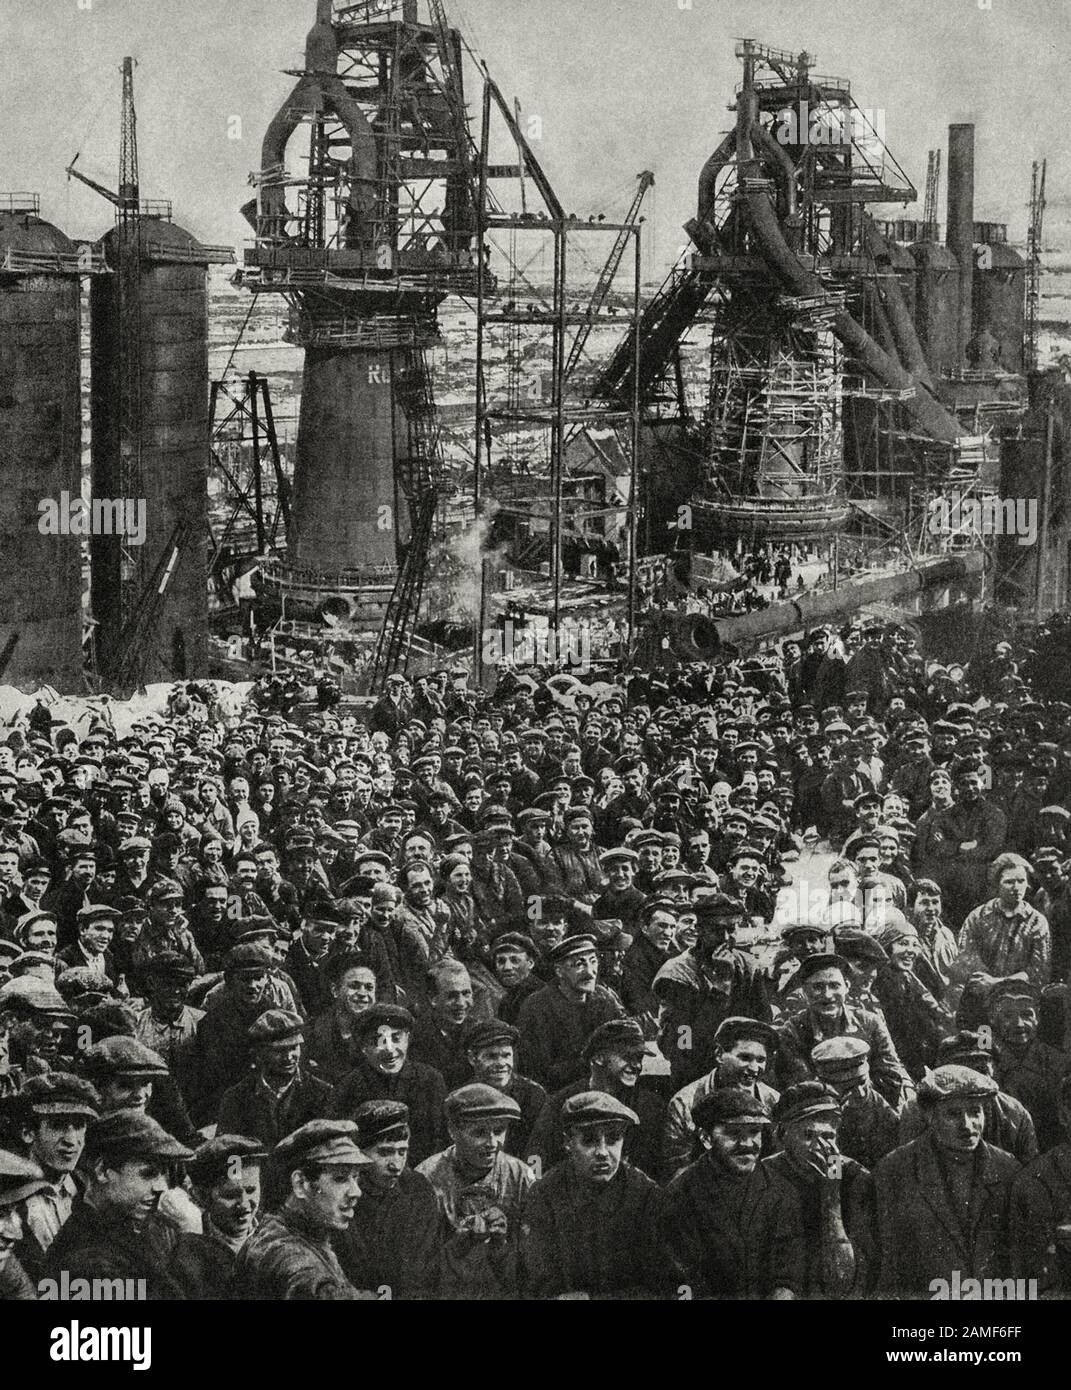 The life in Soviet Union in 1930s. From soviet propaganda book. Photo: Ceremonial meeting at Magnitogorsk, after finishing work at the Kabakov ore min Stock Photo